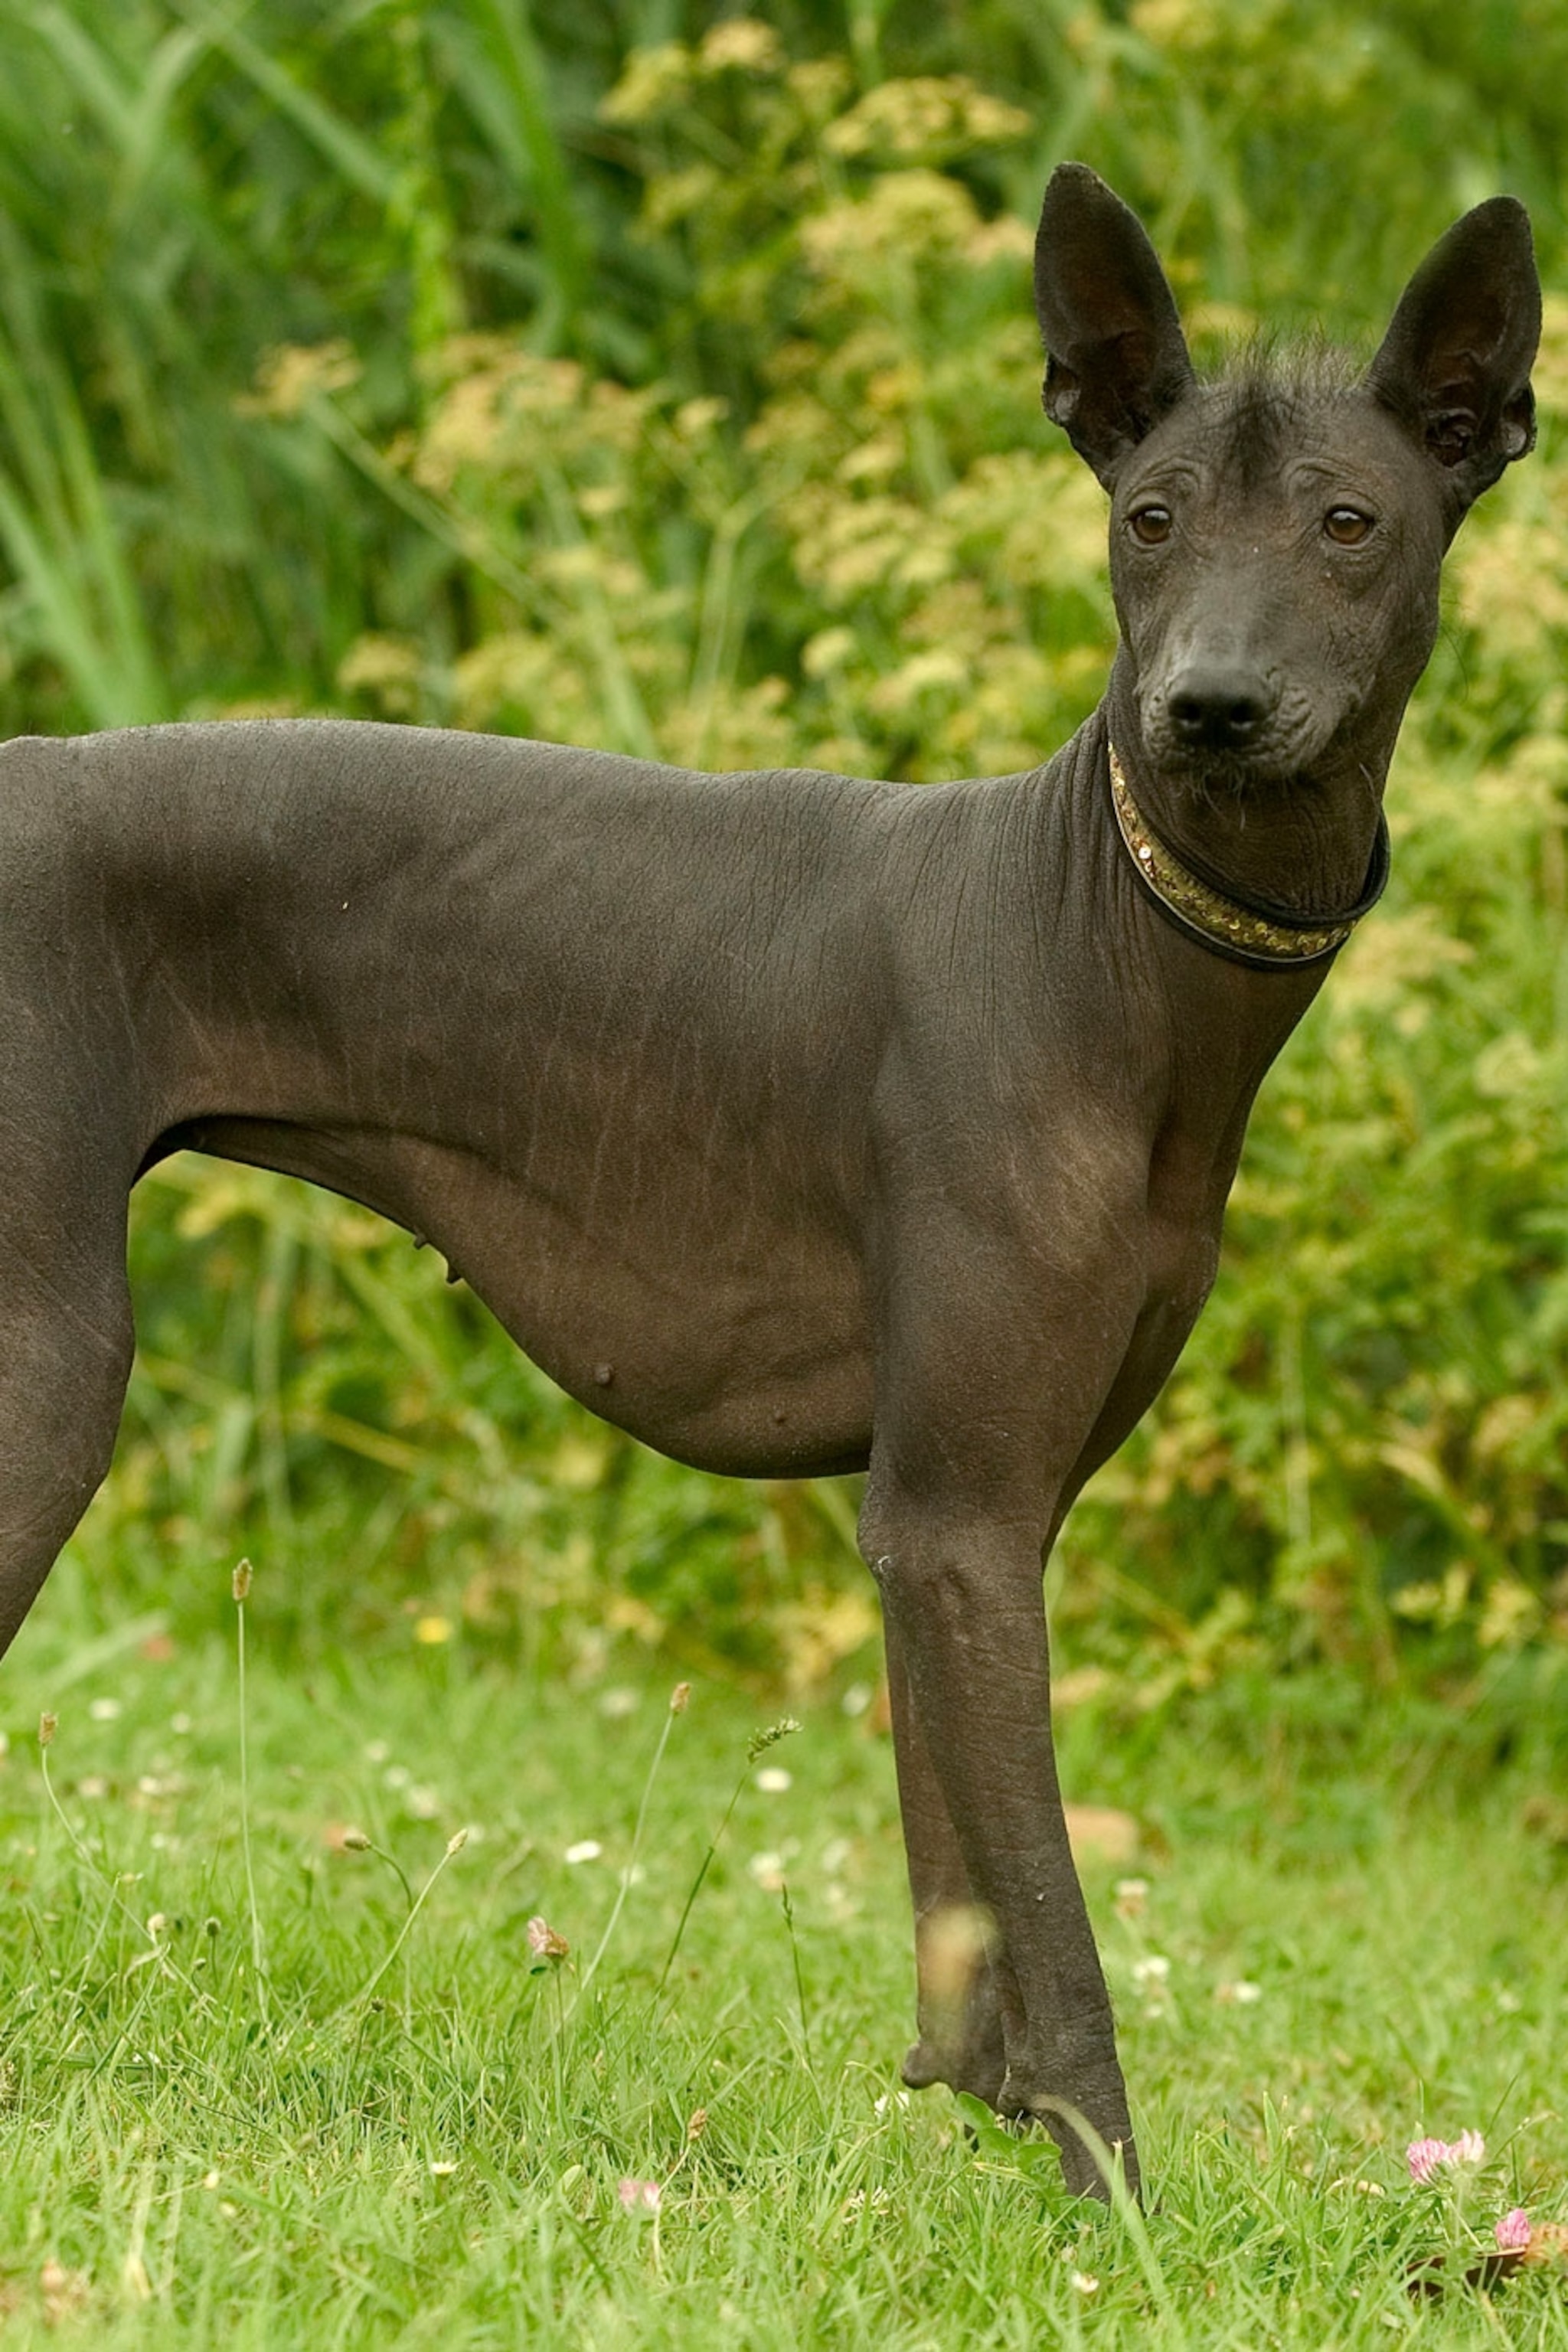 What are the hairless Mexican dogs called?